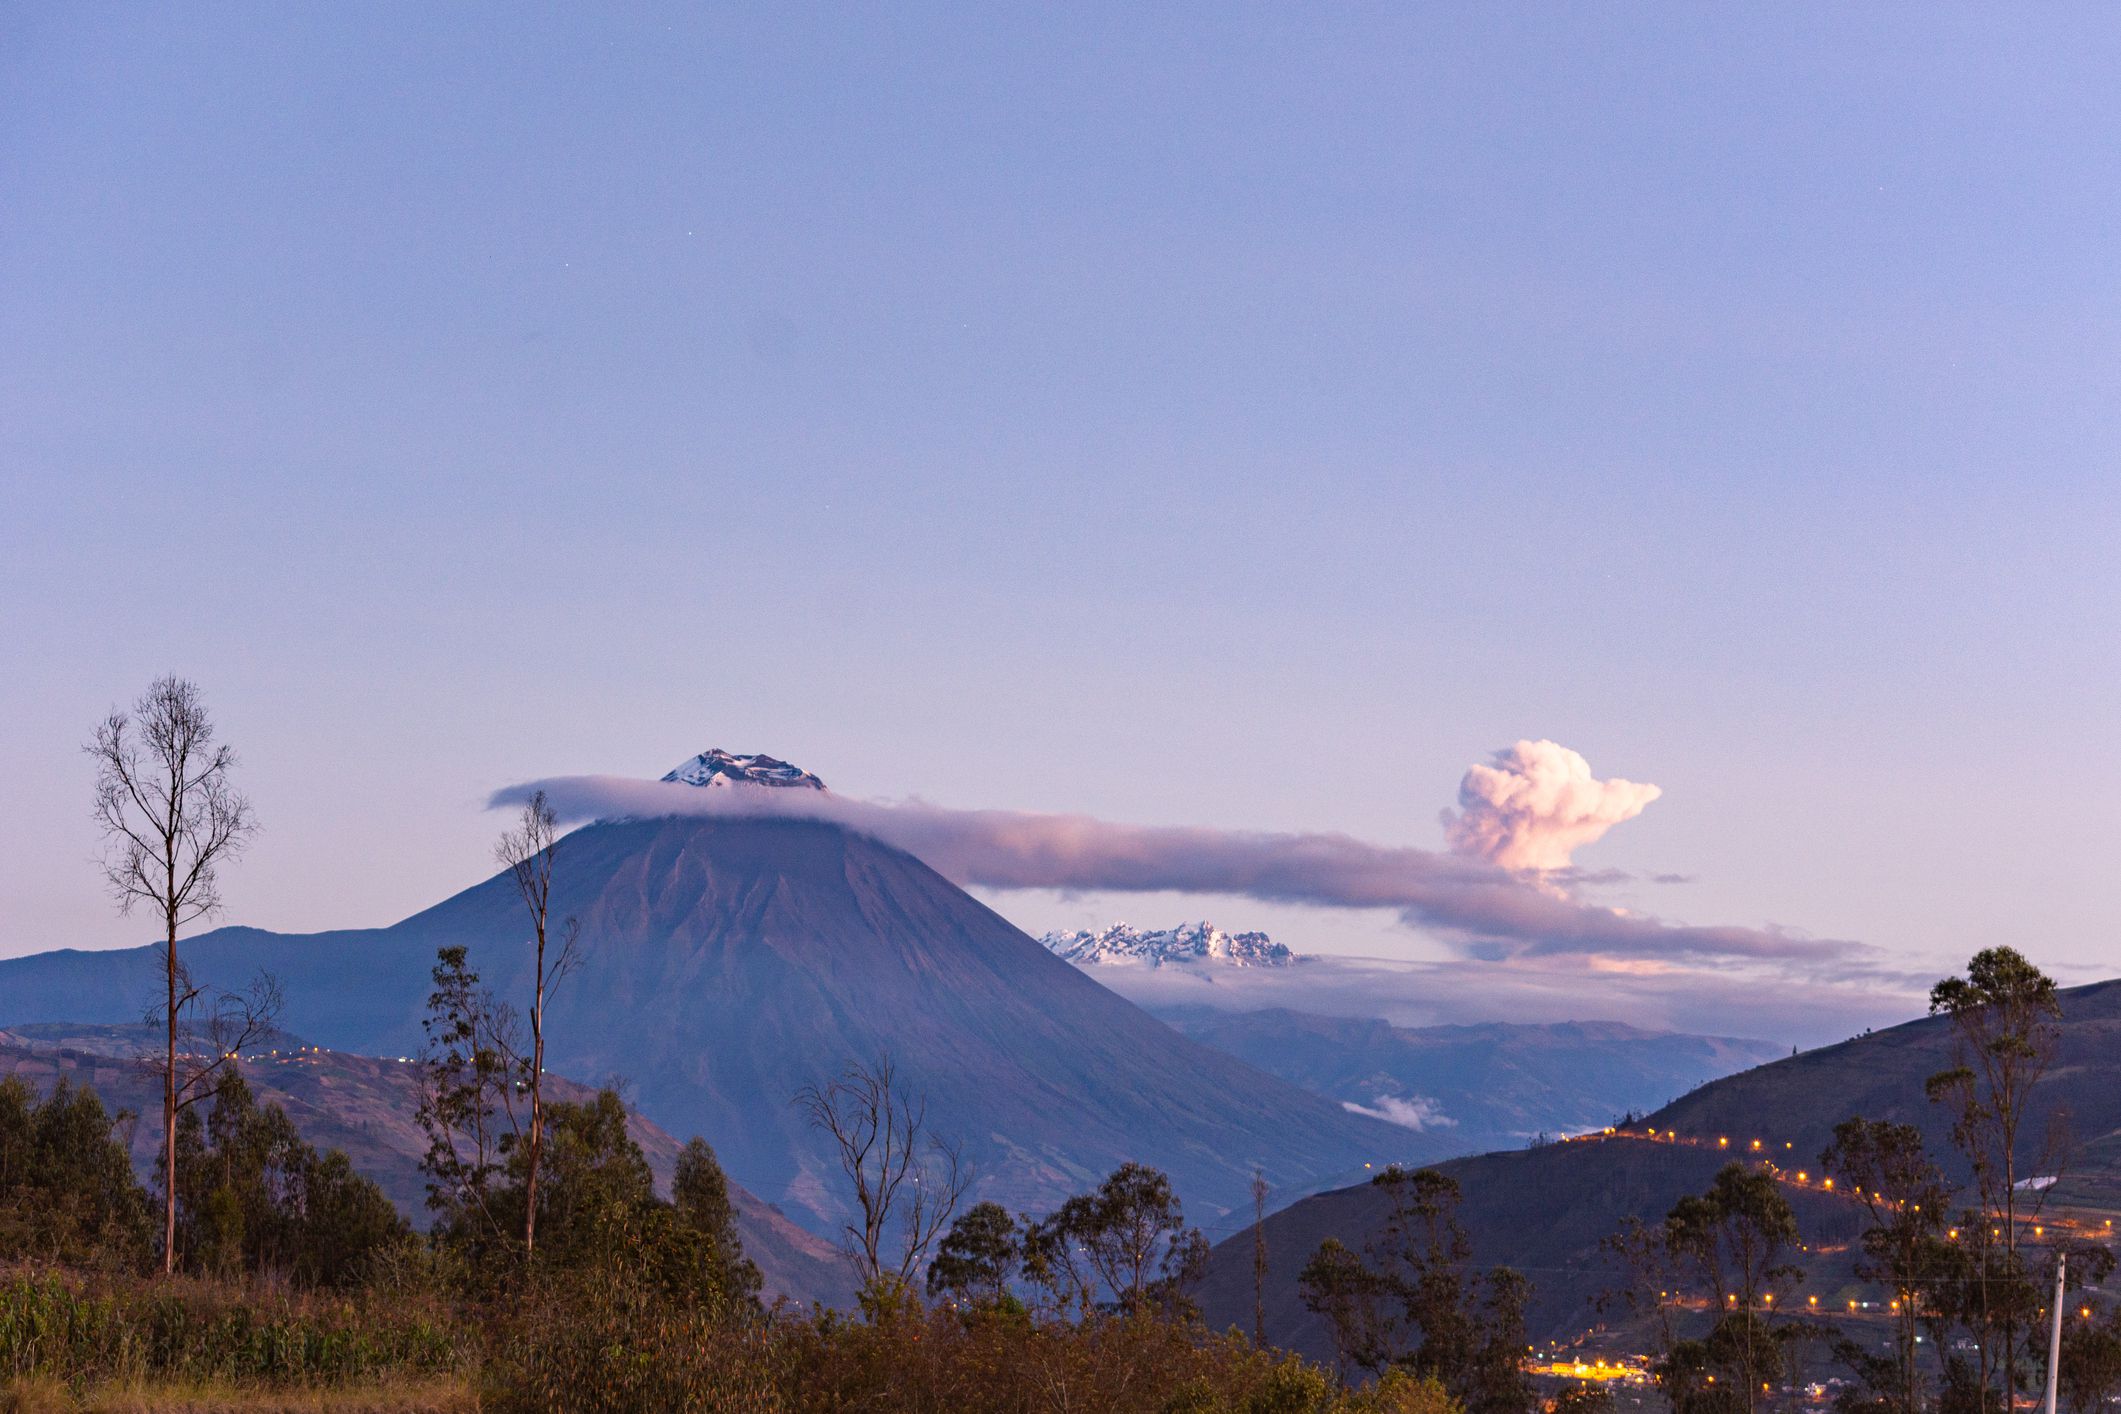 <p><b>Ecuador<br>Elevation:</b> 17,159 feet<br>Sangay, located about 25 miles northwest of Quito, is home to a lush park and vibrant scenery. The mountain was declared a national park in 1991, following UNESCO declaring the area a <a href="https://whc.unesco.org/en/list/260/">World Heritage Site</a> in 1983. Visitors can camp, climb the mountain, hike, raft, or cycle through the park.   </p>